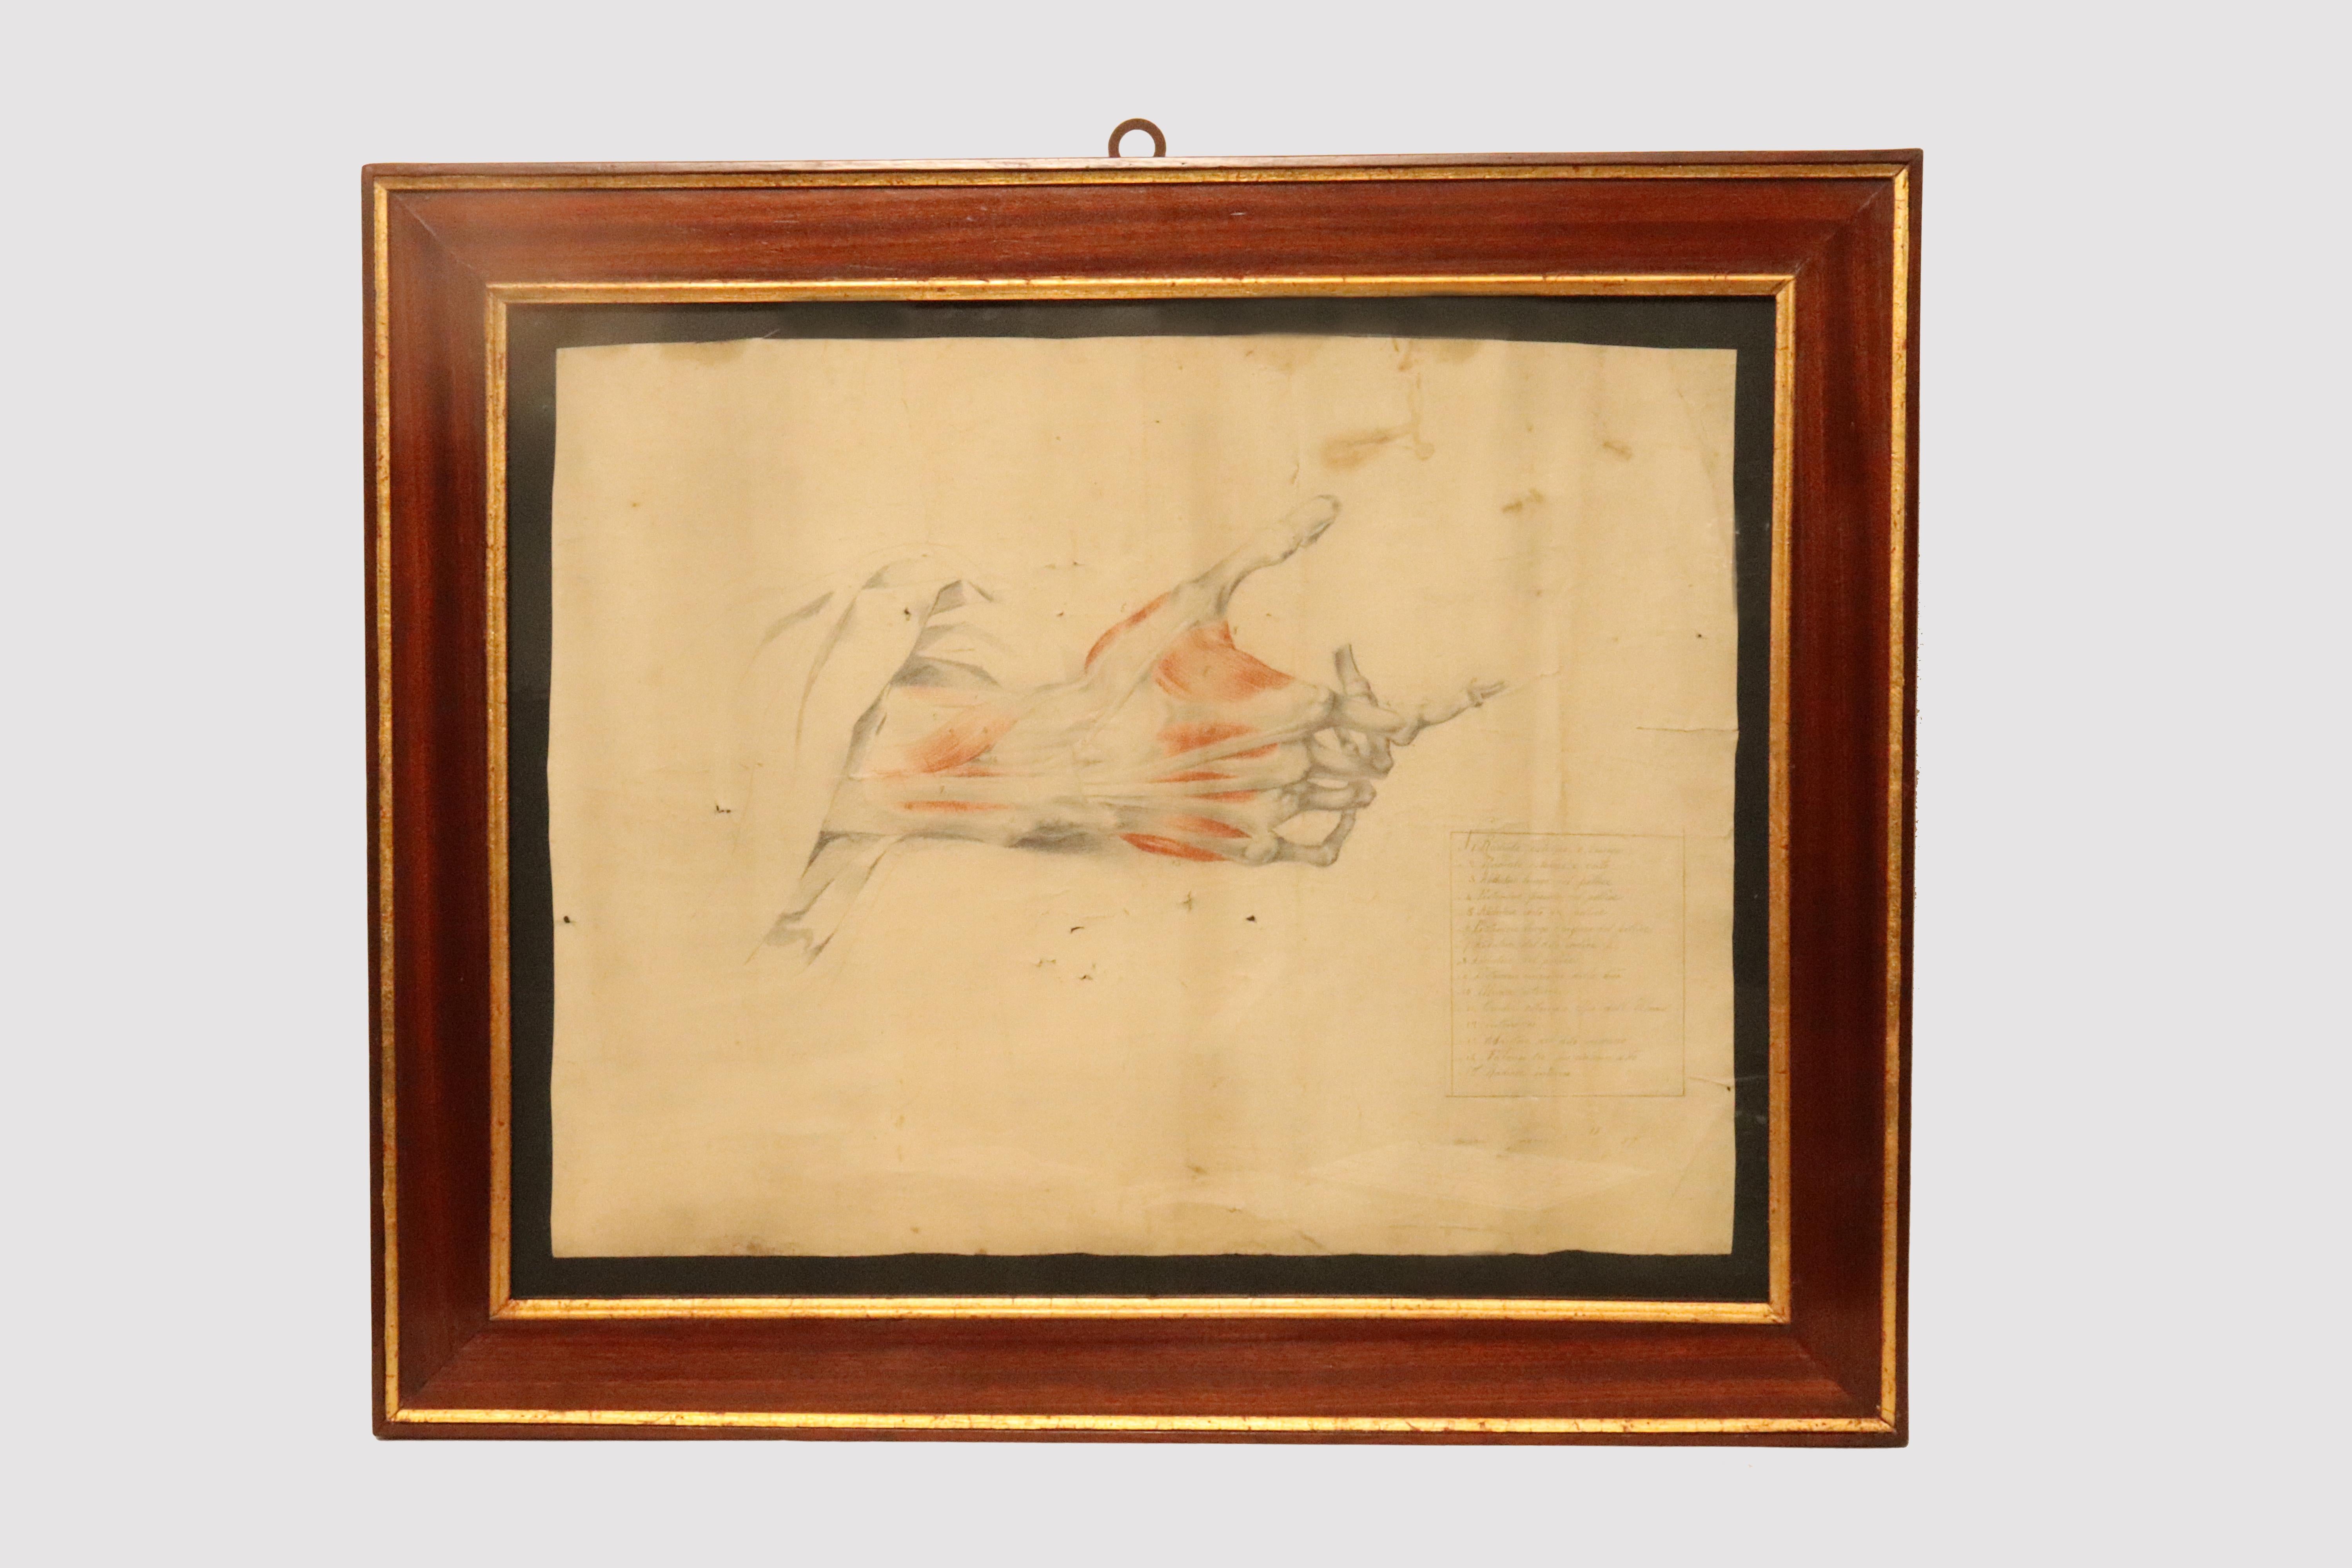 A painting containing an ancient anatomical drawing of an hand, made in pencil and sanguine. The contemporary frame, Empire style, made of wood, veneered in mahogany essence, enriched with gilded wood profiles. Iron hook. Signed Giovanni Ambrosini,